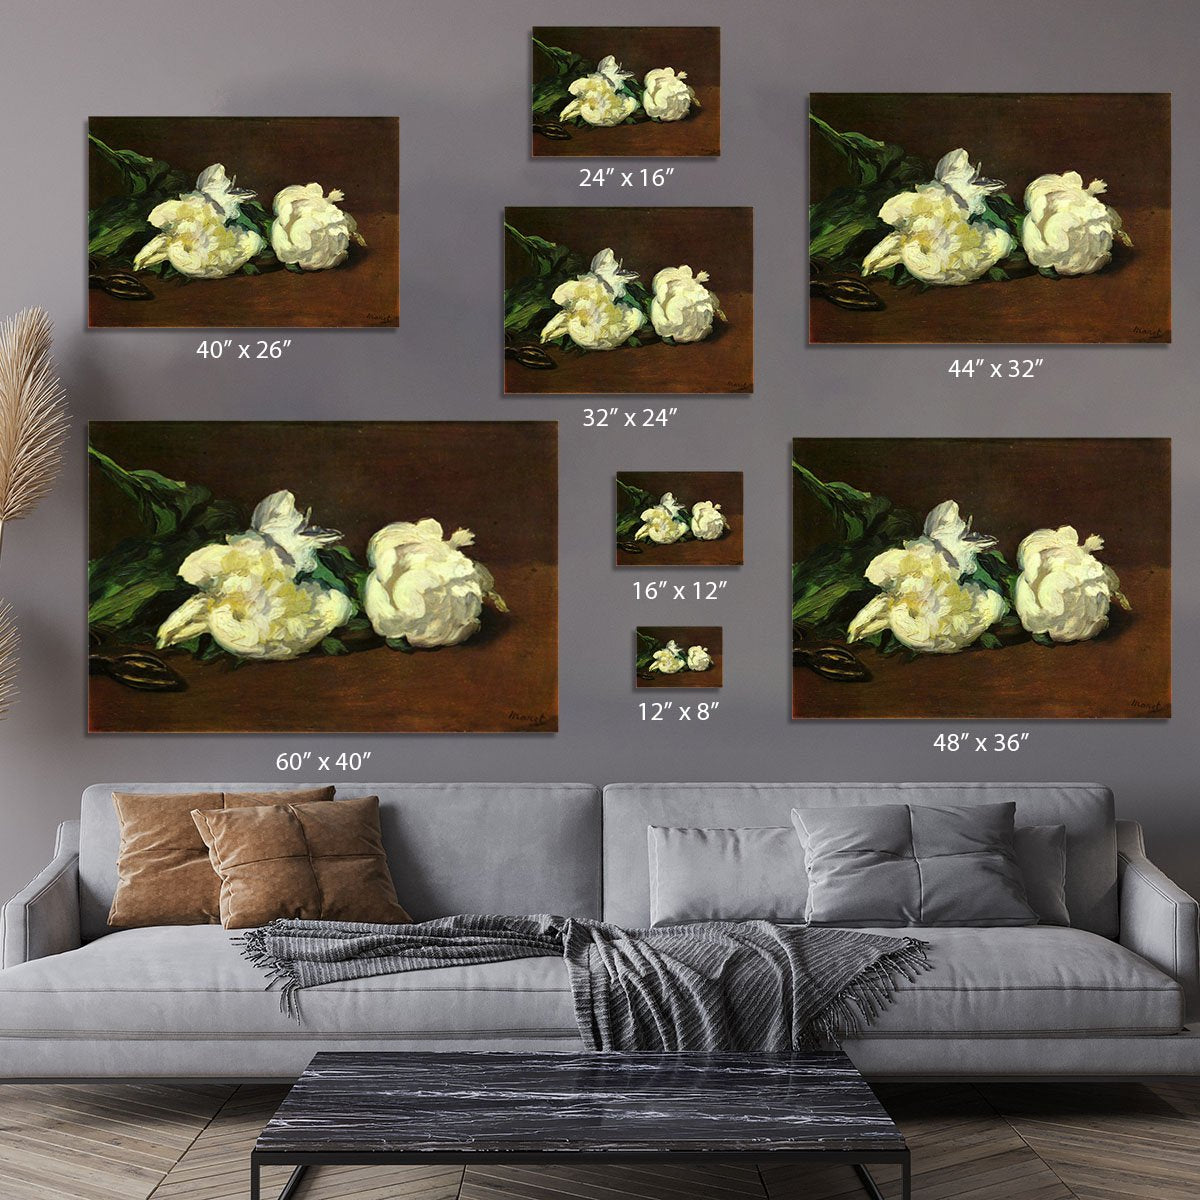 Still life White Peony by Manet Canvas Print or Poster